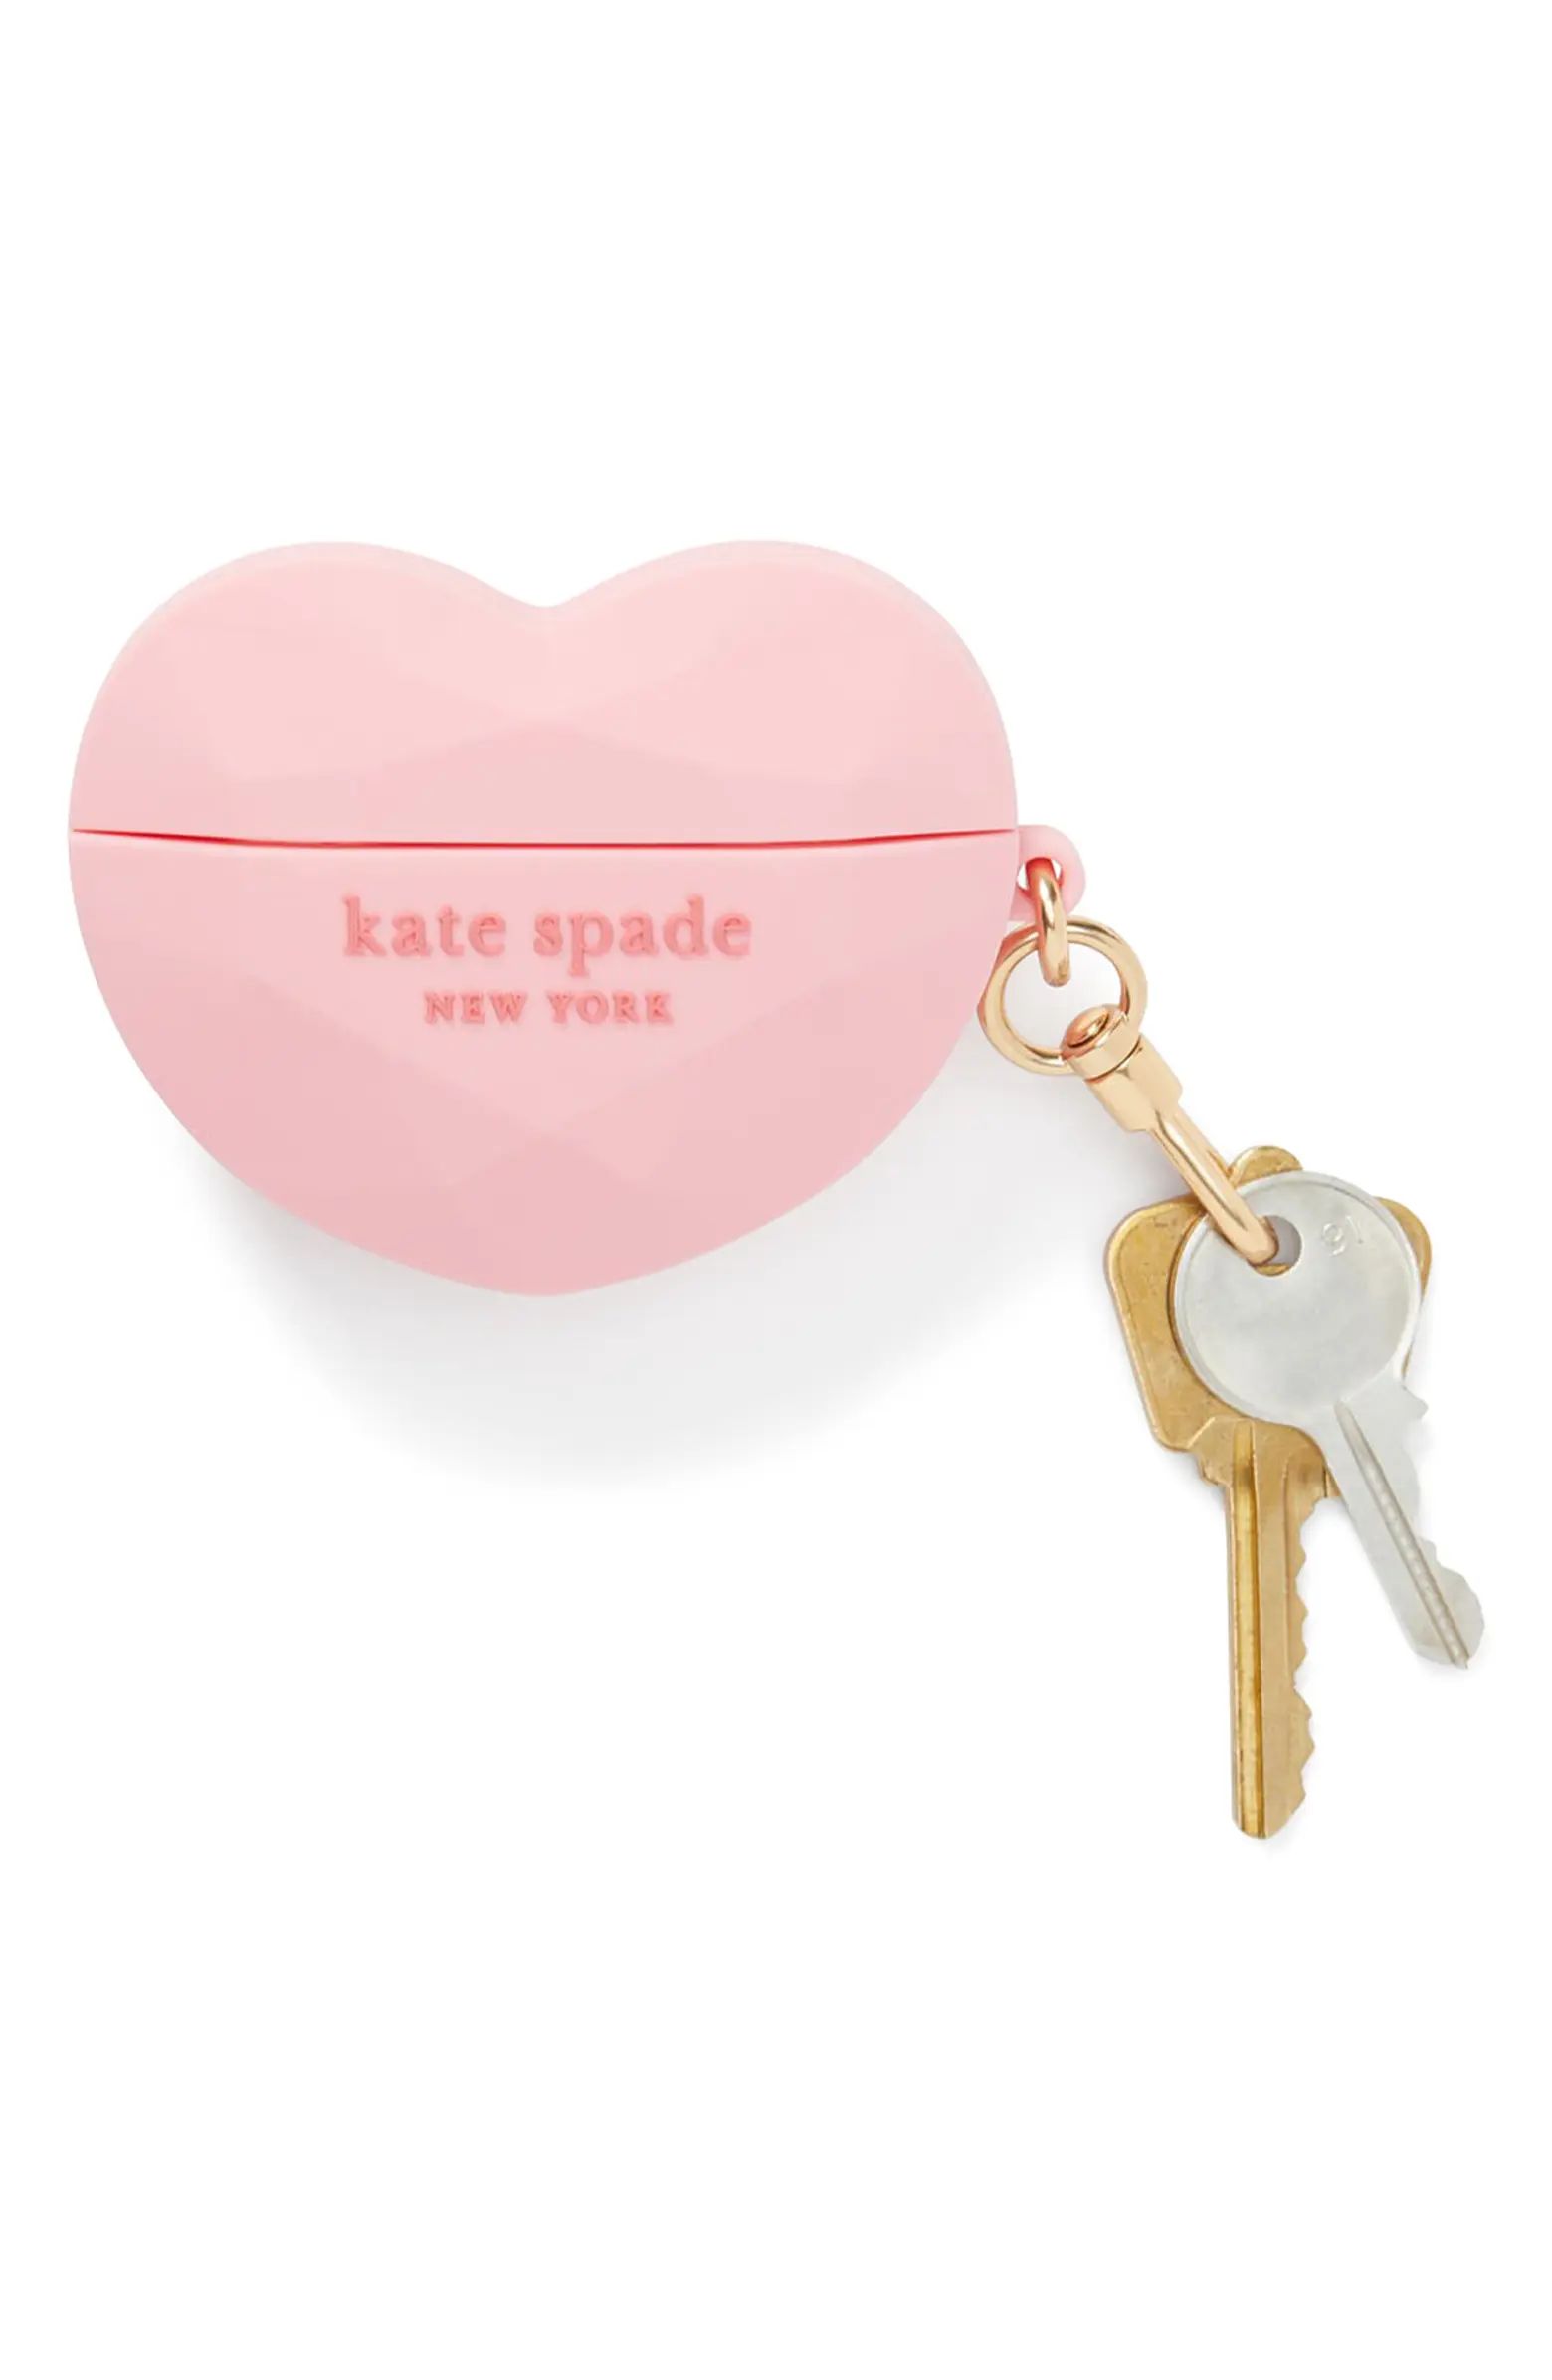 kate spade new york gala candy heart Airpods Pro case | Nordstrom | Nordstrom